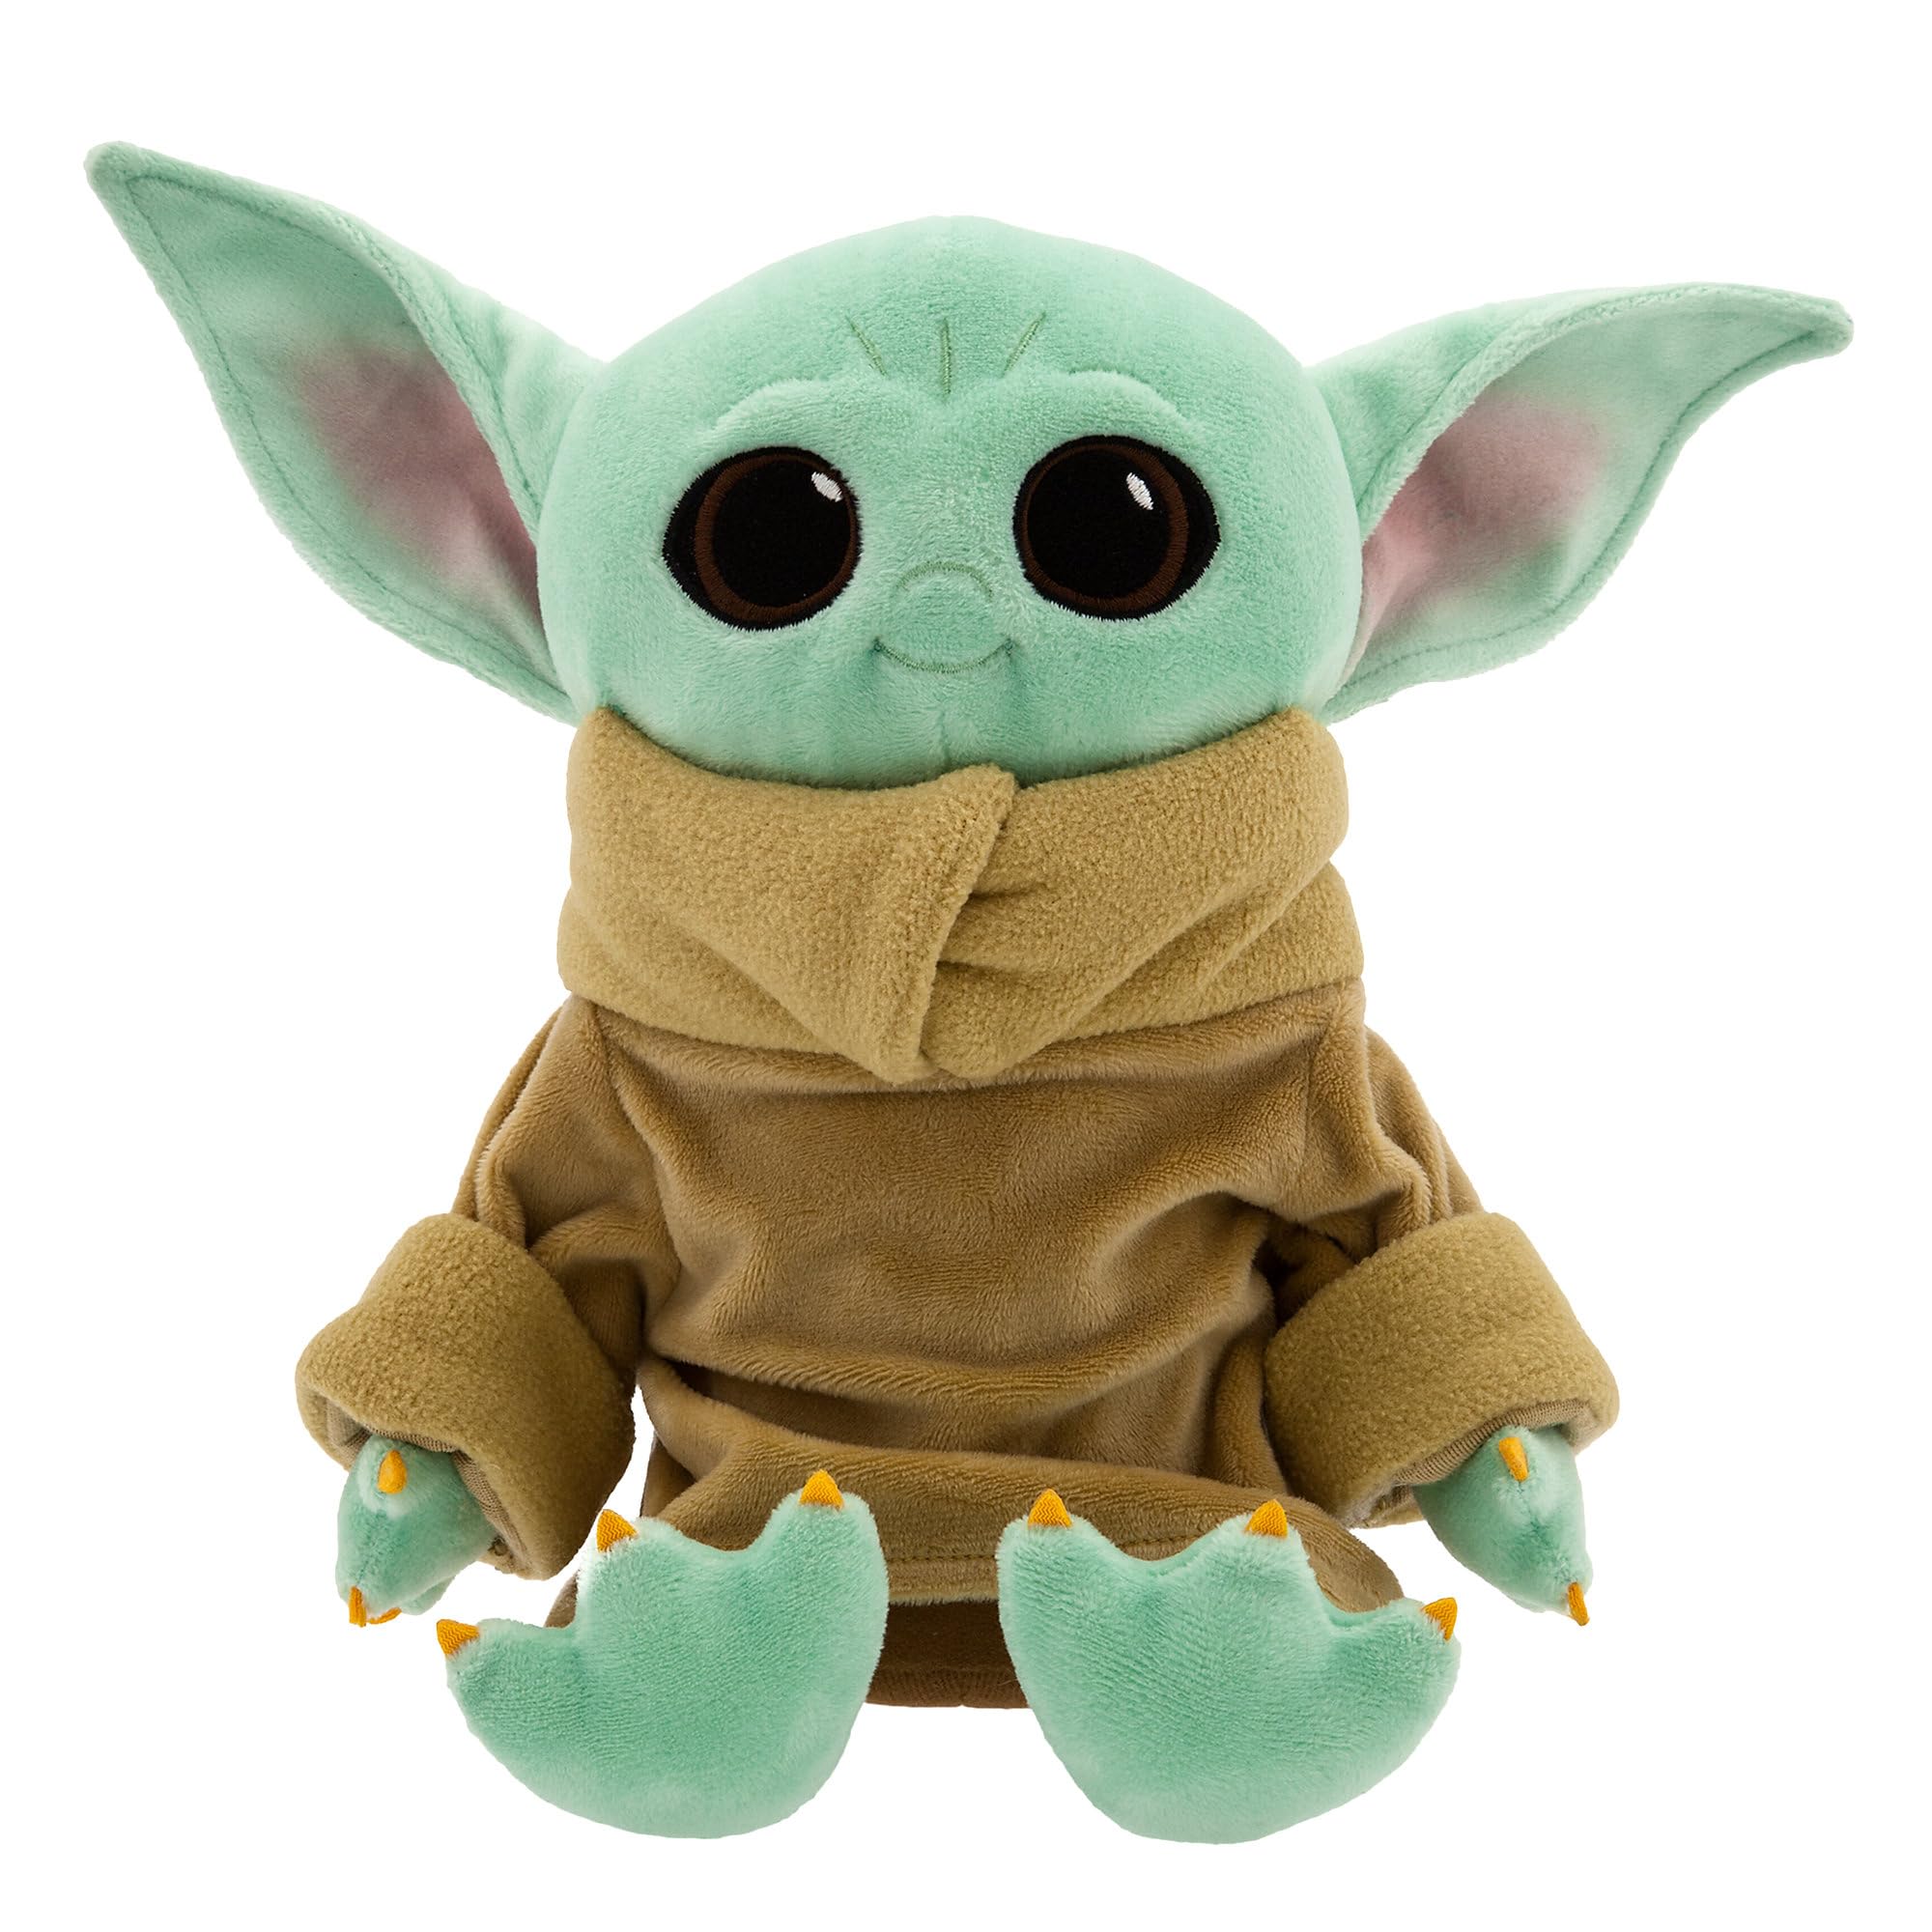 Disney Store Official Star Wars 10-Inch Grogu Plush in Swaddle - The Child' Design from The Mandalorian Series Babies Edition - Soft & Cuddly Toy for Fans & Kids